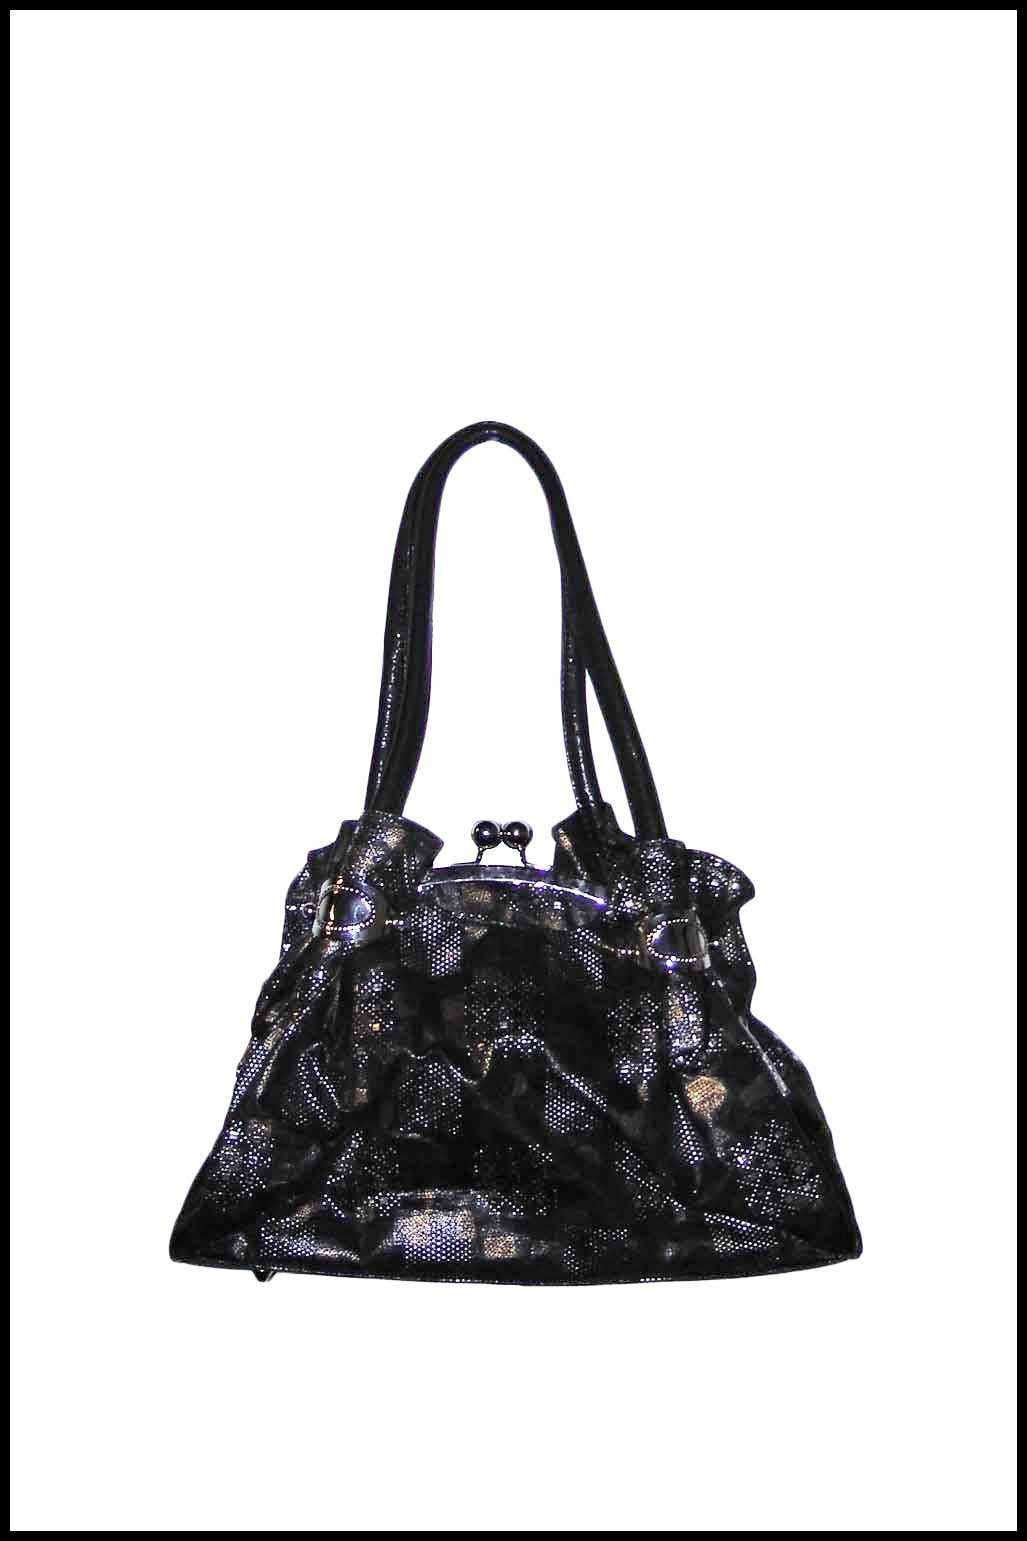 Vintage-inspired Printed Handbag with Oversize Clasp